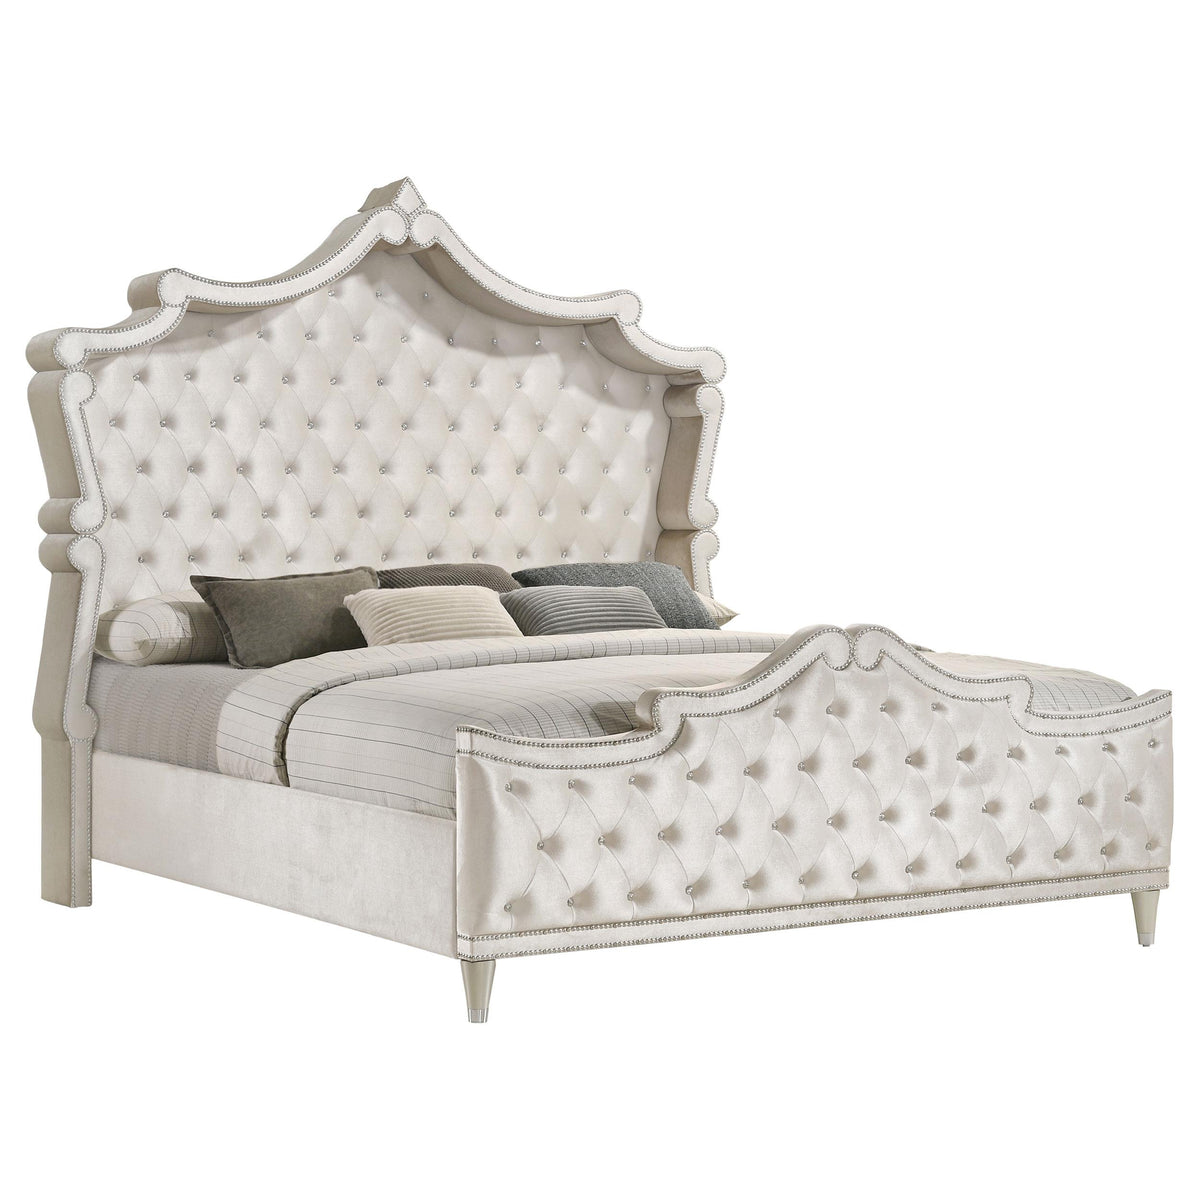 Antonella Upholstered Tufted California King Bed Ivory and Camel  Las Vegas Furniture Stores